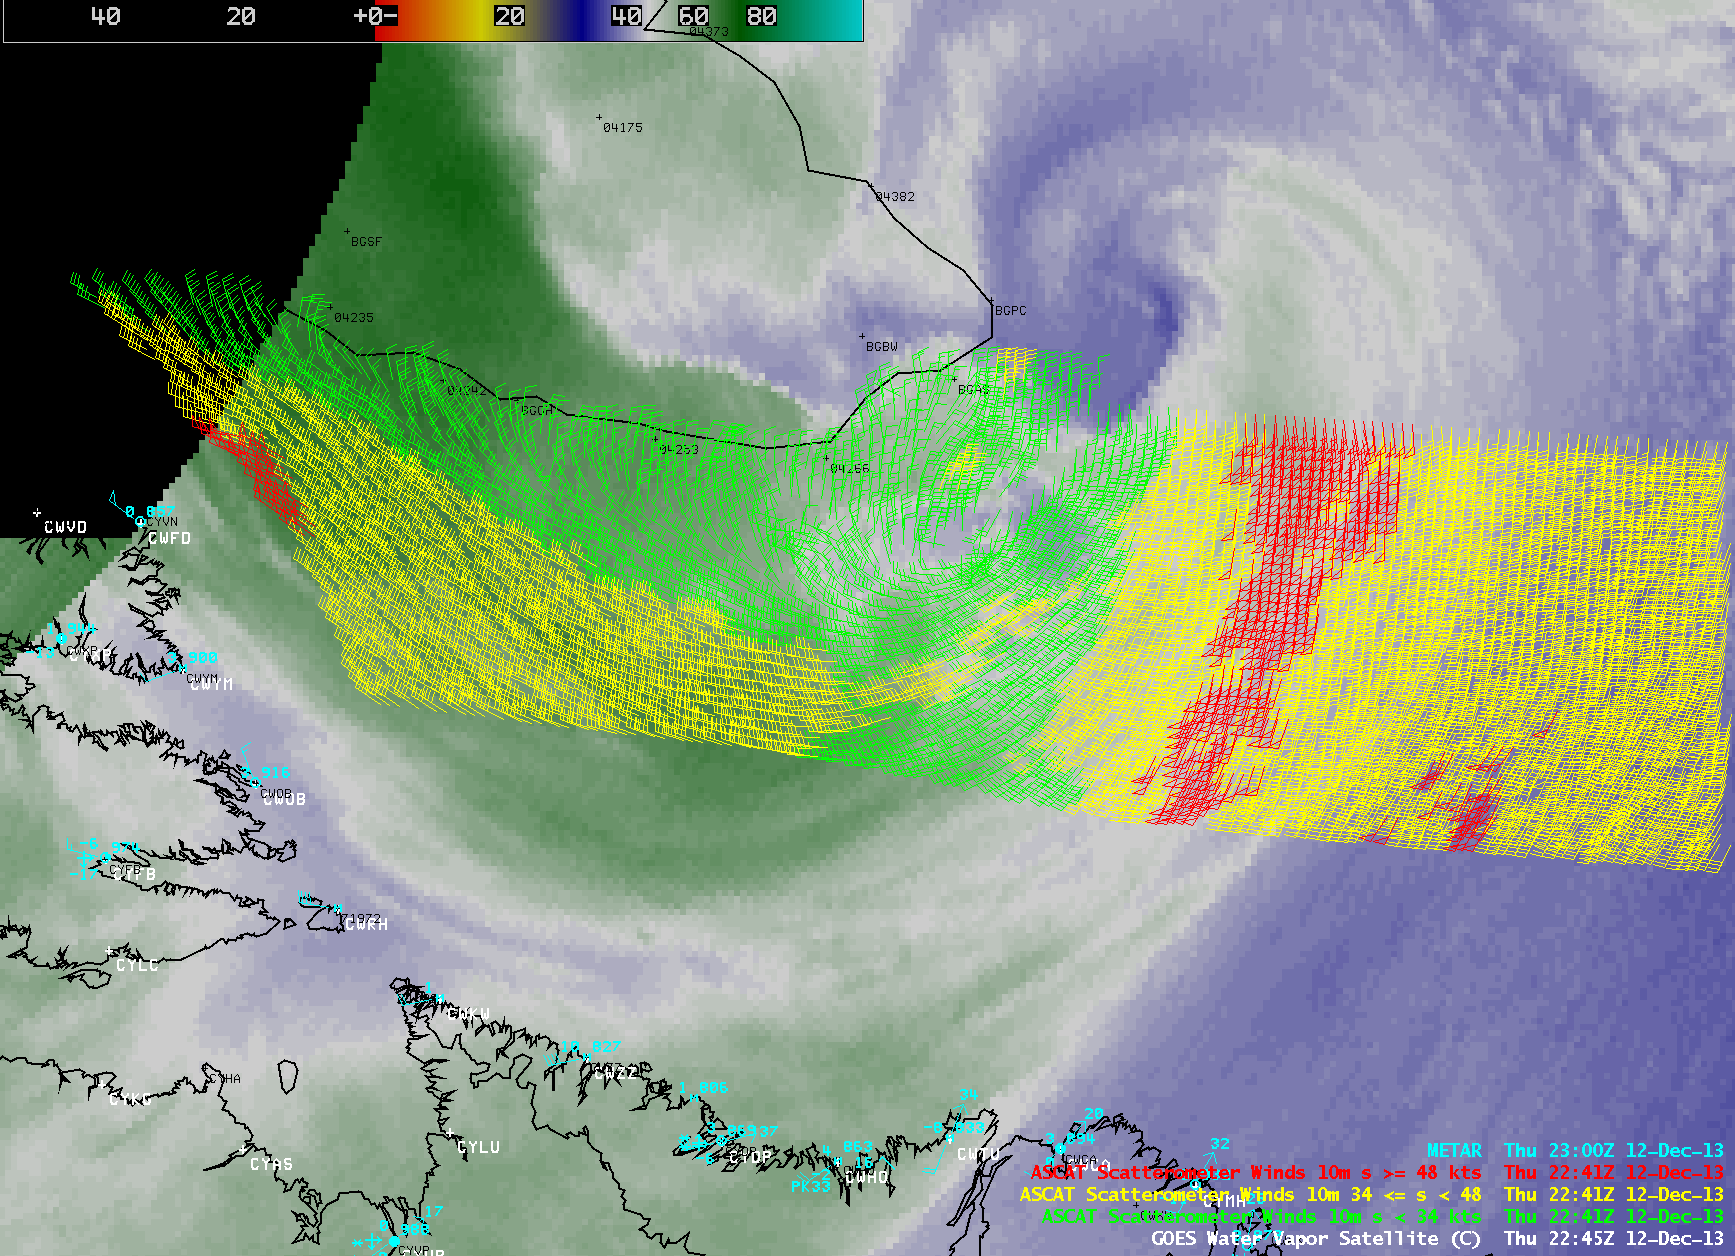 GOES-13 6.5 Âµm water vapor image and ASCAT scatterometer surface winds